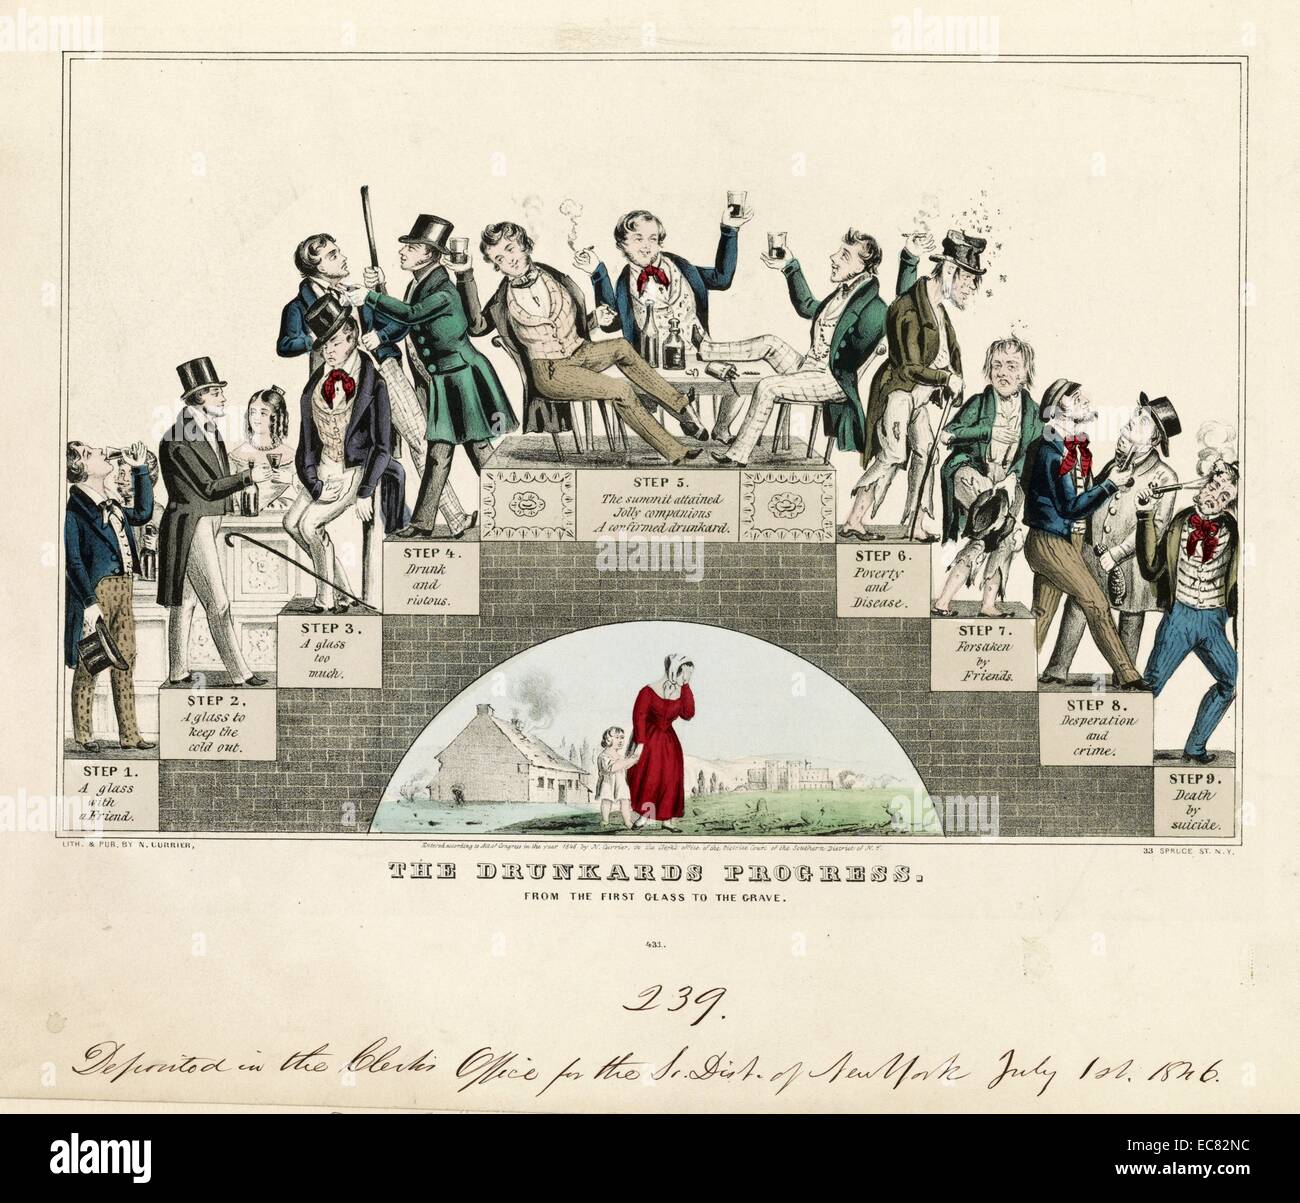 The drunkards progress. From the first glass to the grave. Shows an archway of the nine steps of a drunkard's progress, beginning with a man in fancy dress having 'a glass with a friend' and then his gradual decline in society with poverty & disease, criminal activity, becoming a bum, and his eventual 'death by suicide'; a weeping woman with child is under archway. 1846 Stock Photo